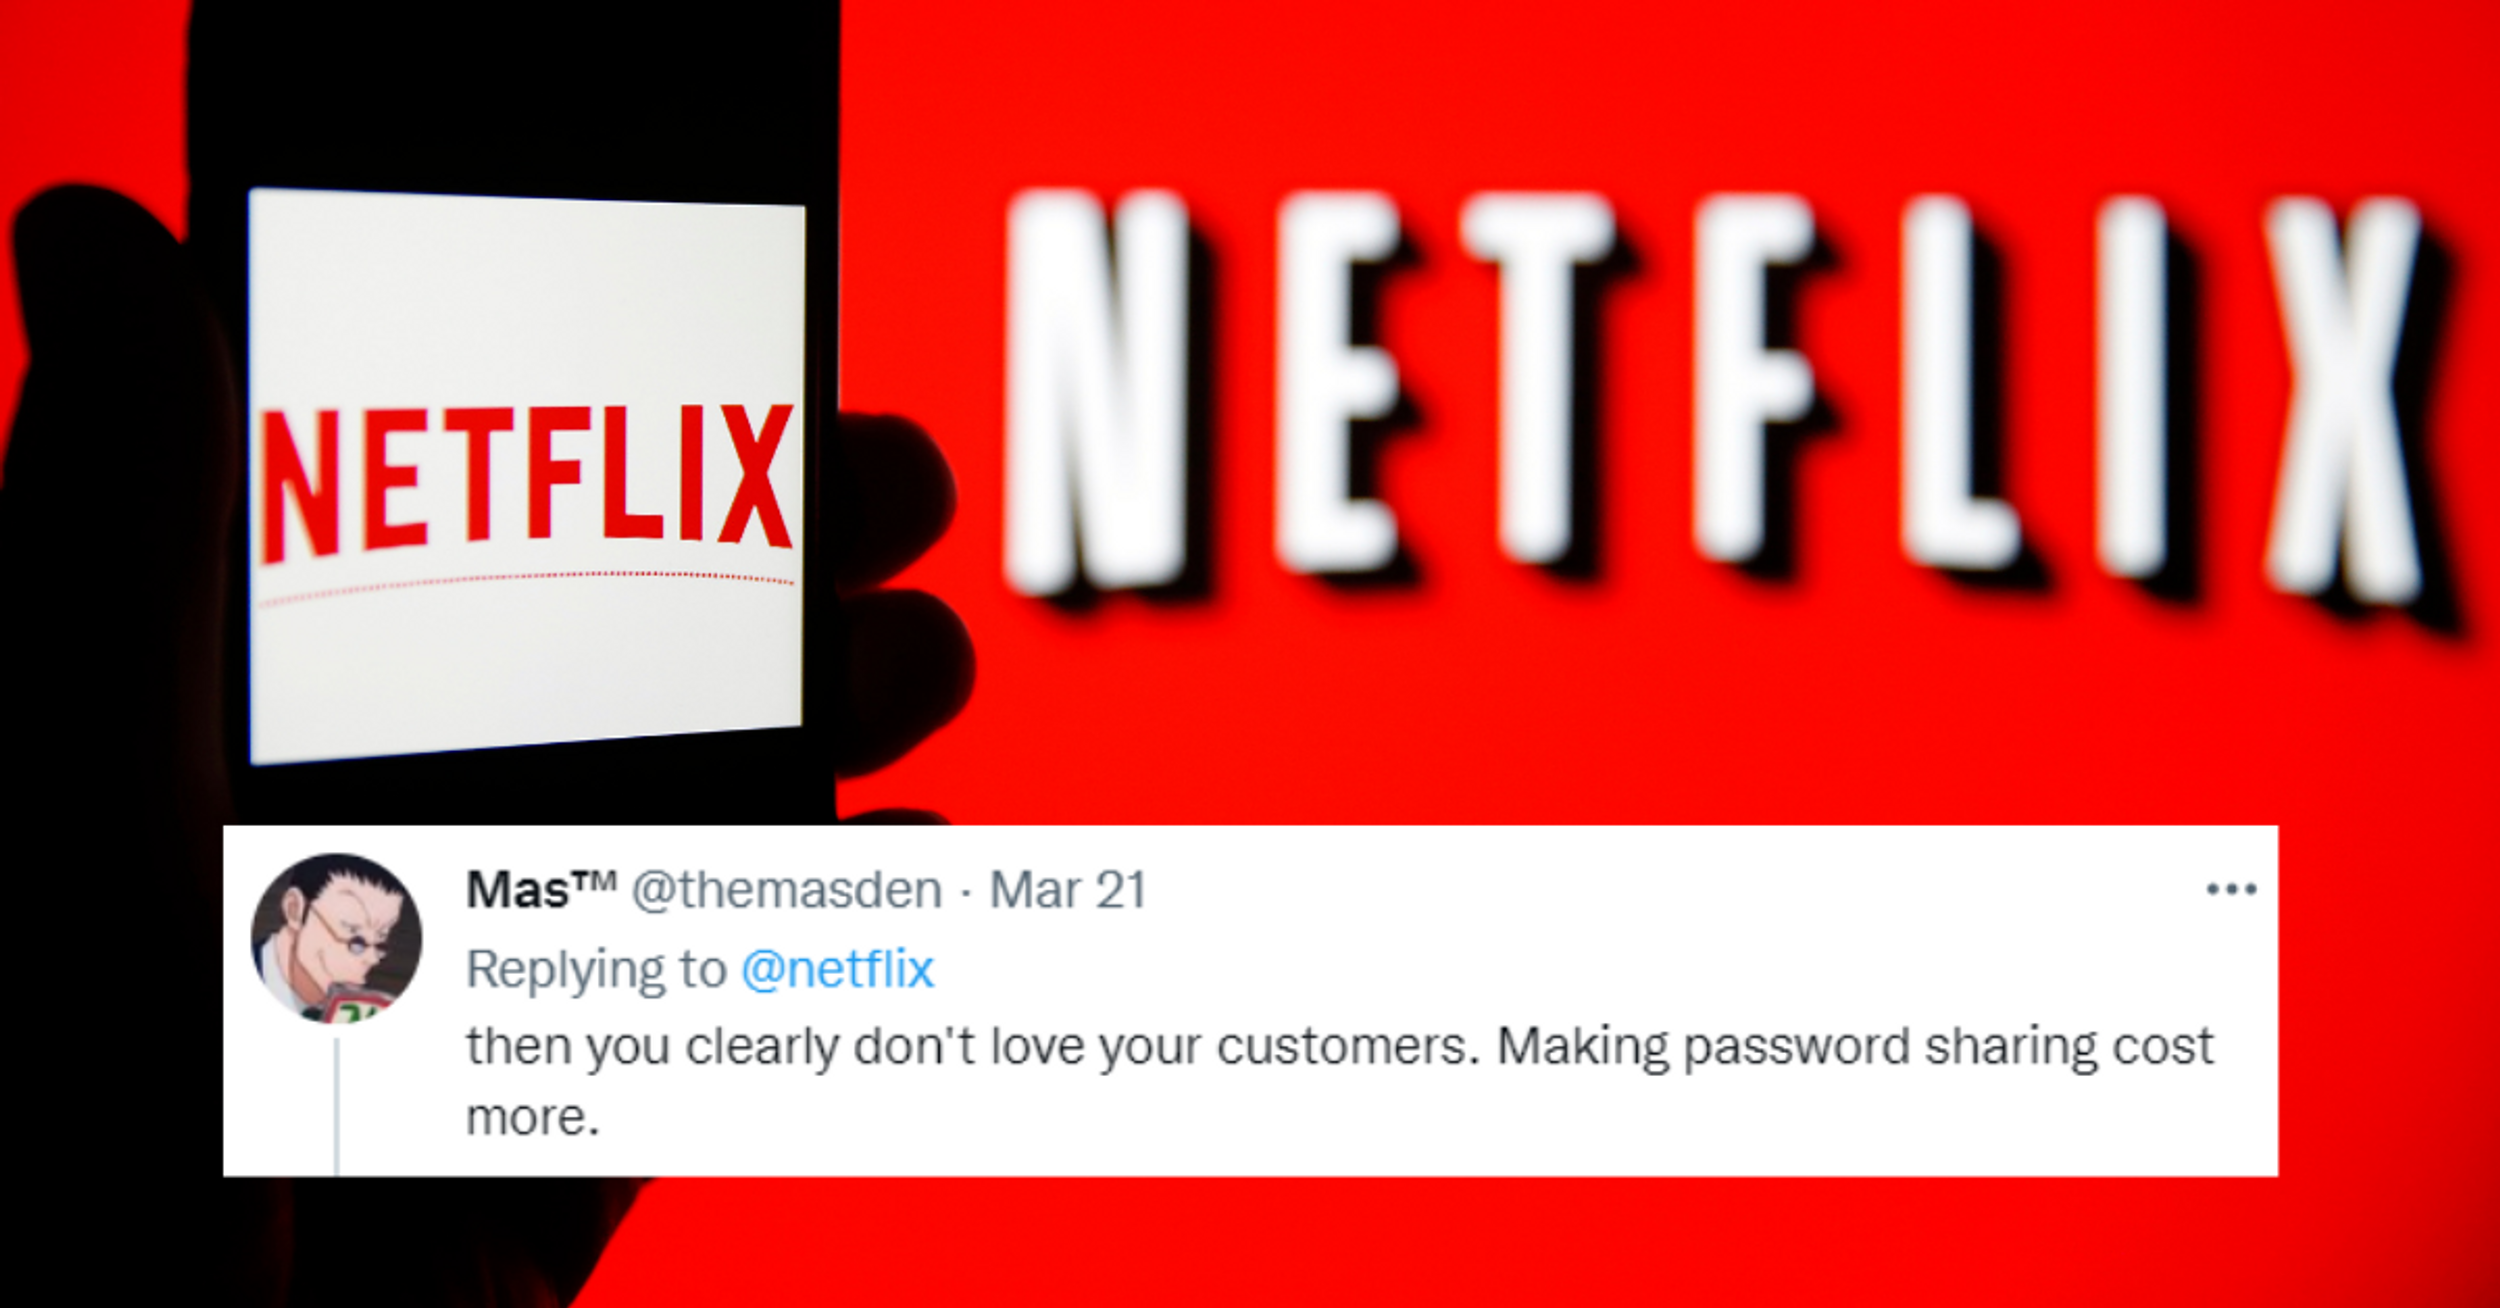 An Old Tweet From Netflix About Sharing Passwords Has Aged Terribly Amid Their Latest Crackdown